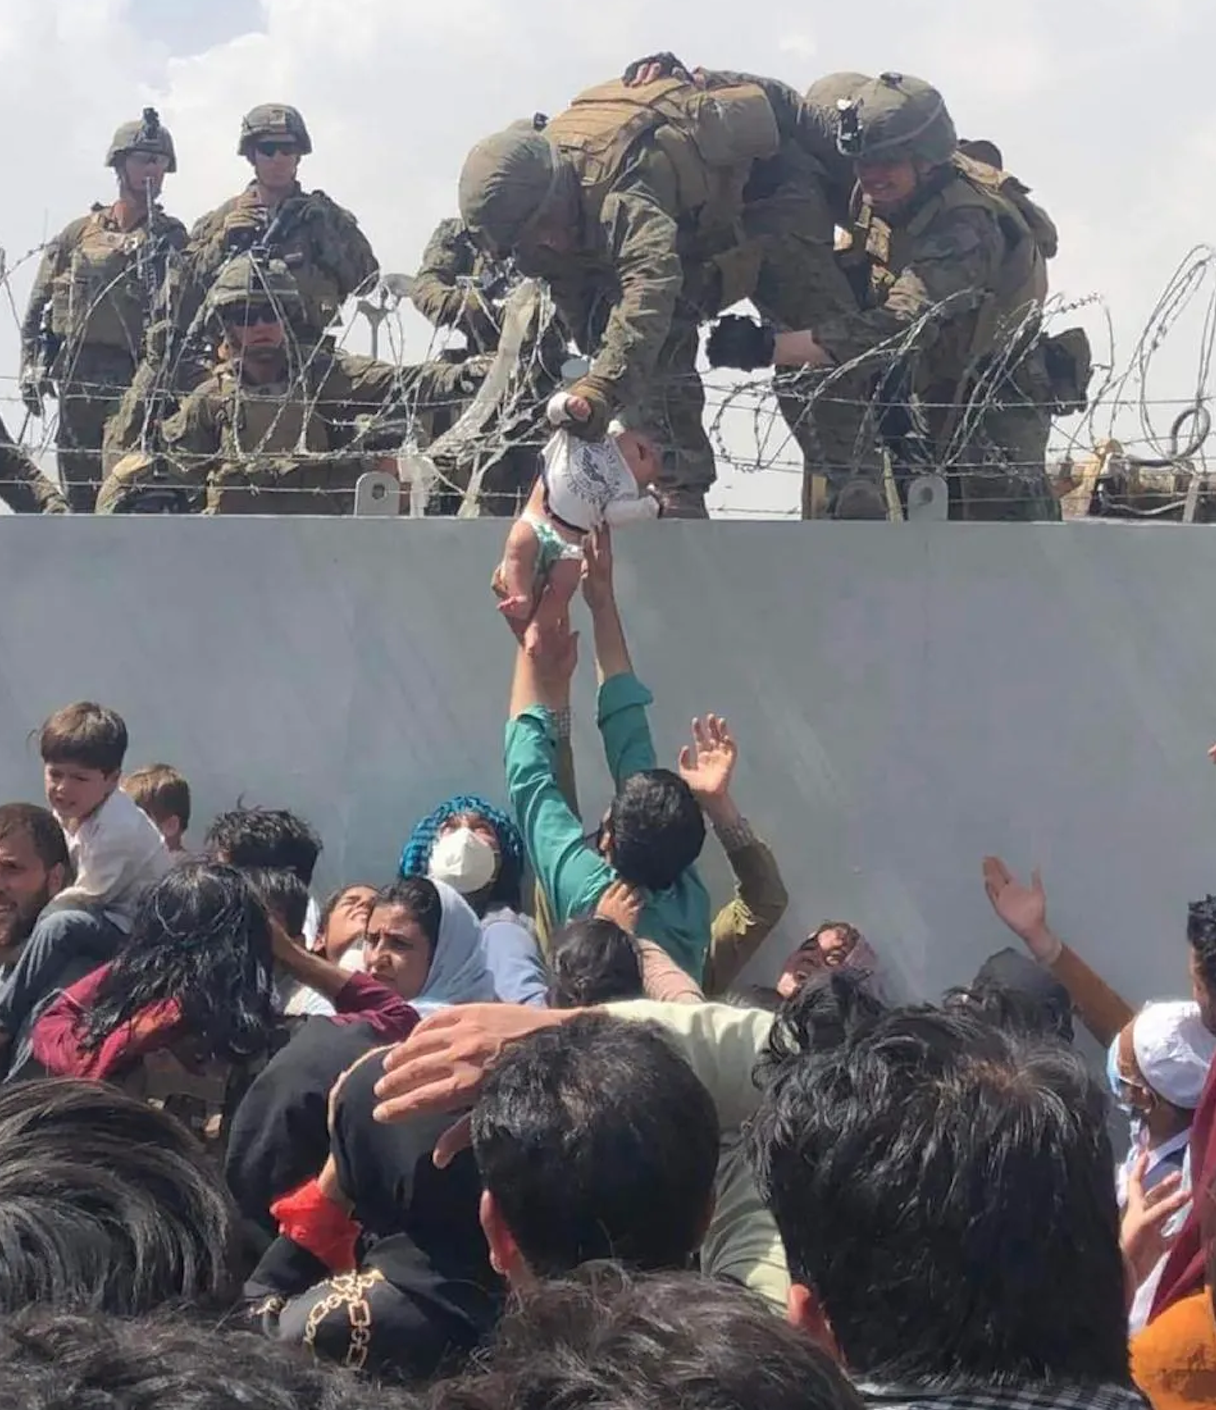 A U.S. Marine lifts an infant over a barbed wire fence during an evacuation at Hamid Karzai International Airport in Kabul. (Photo by - / Courtesy of Omar Haidiri / AFP).